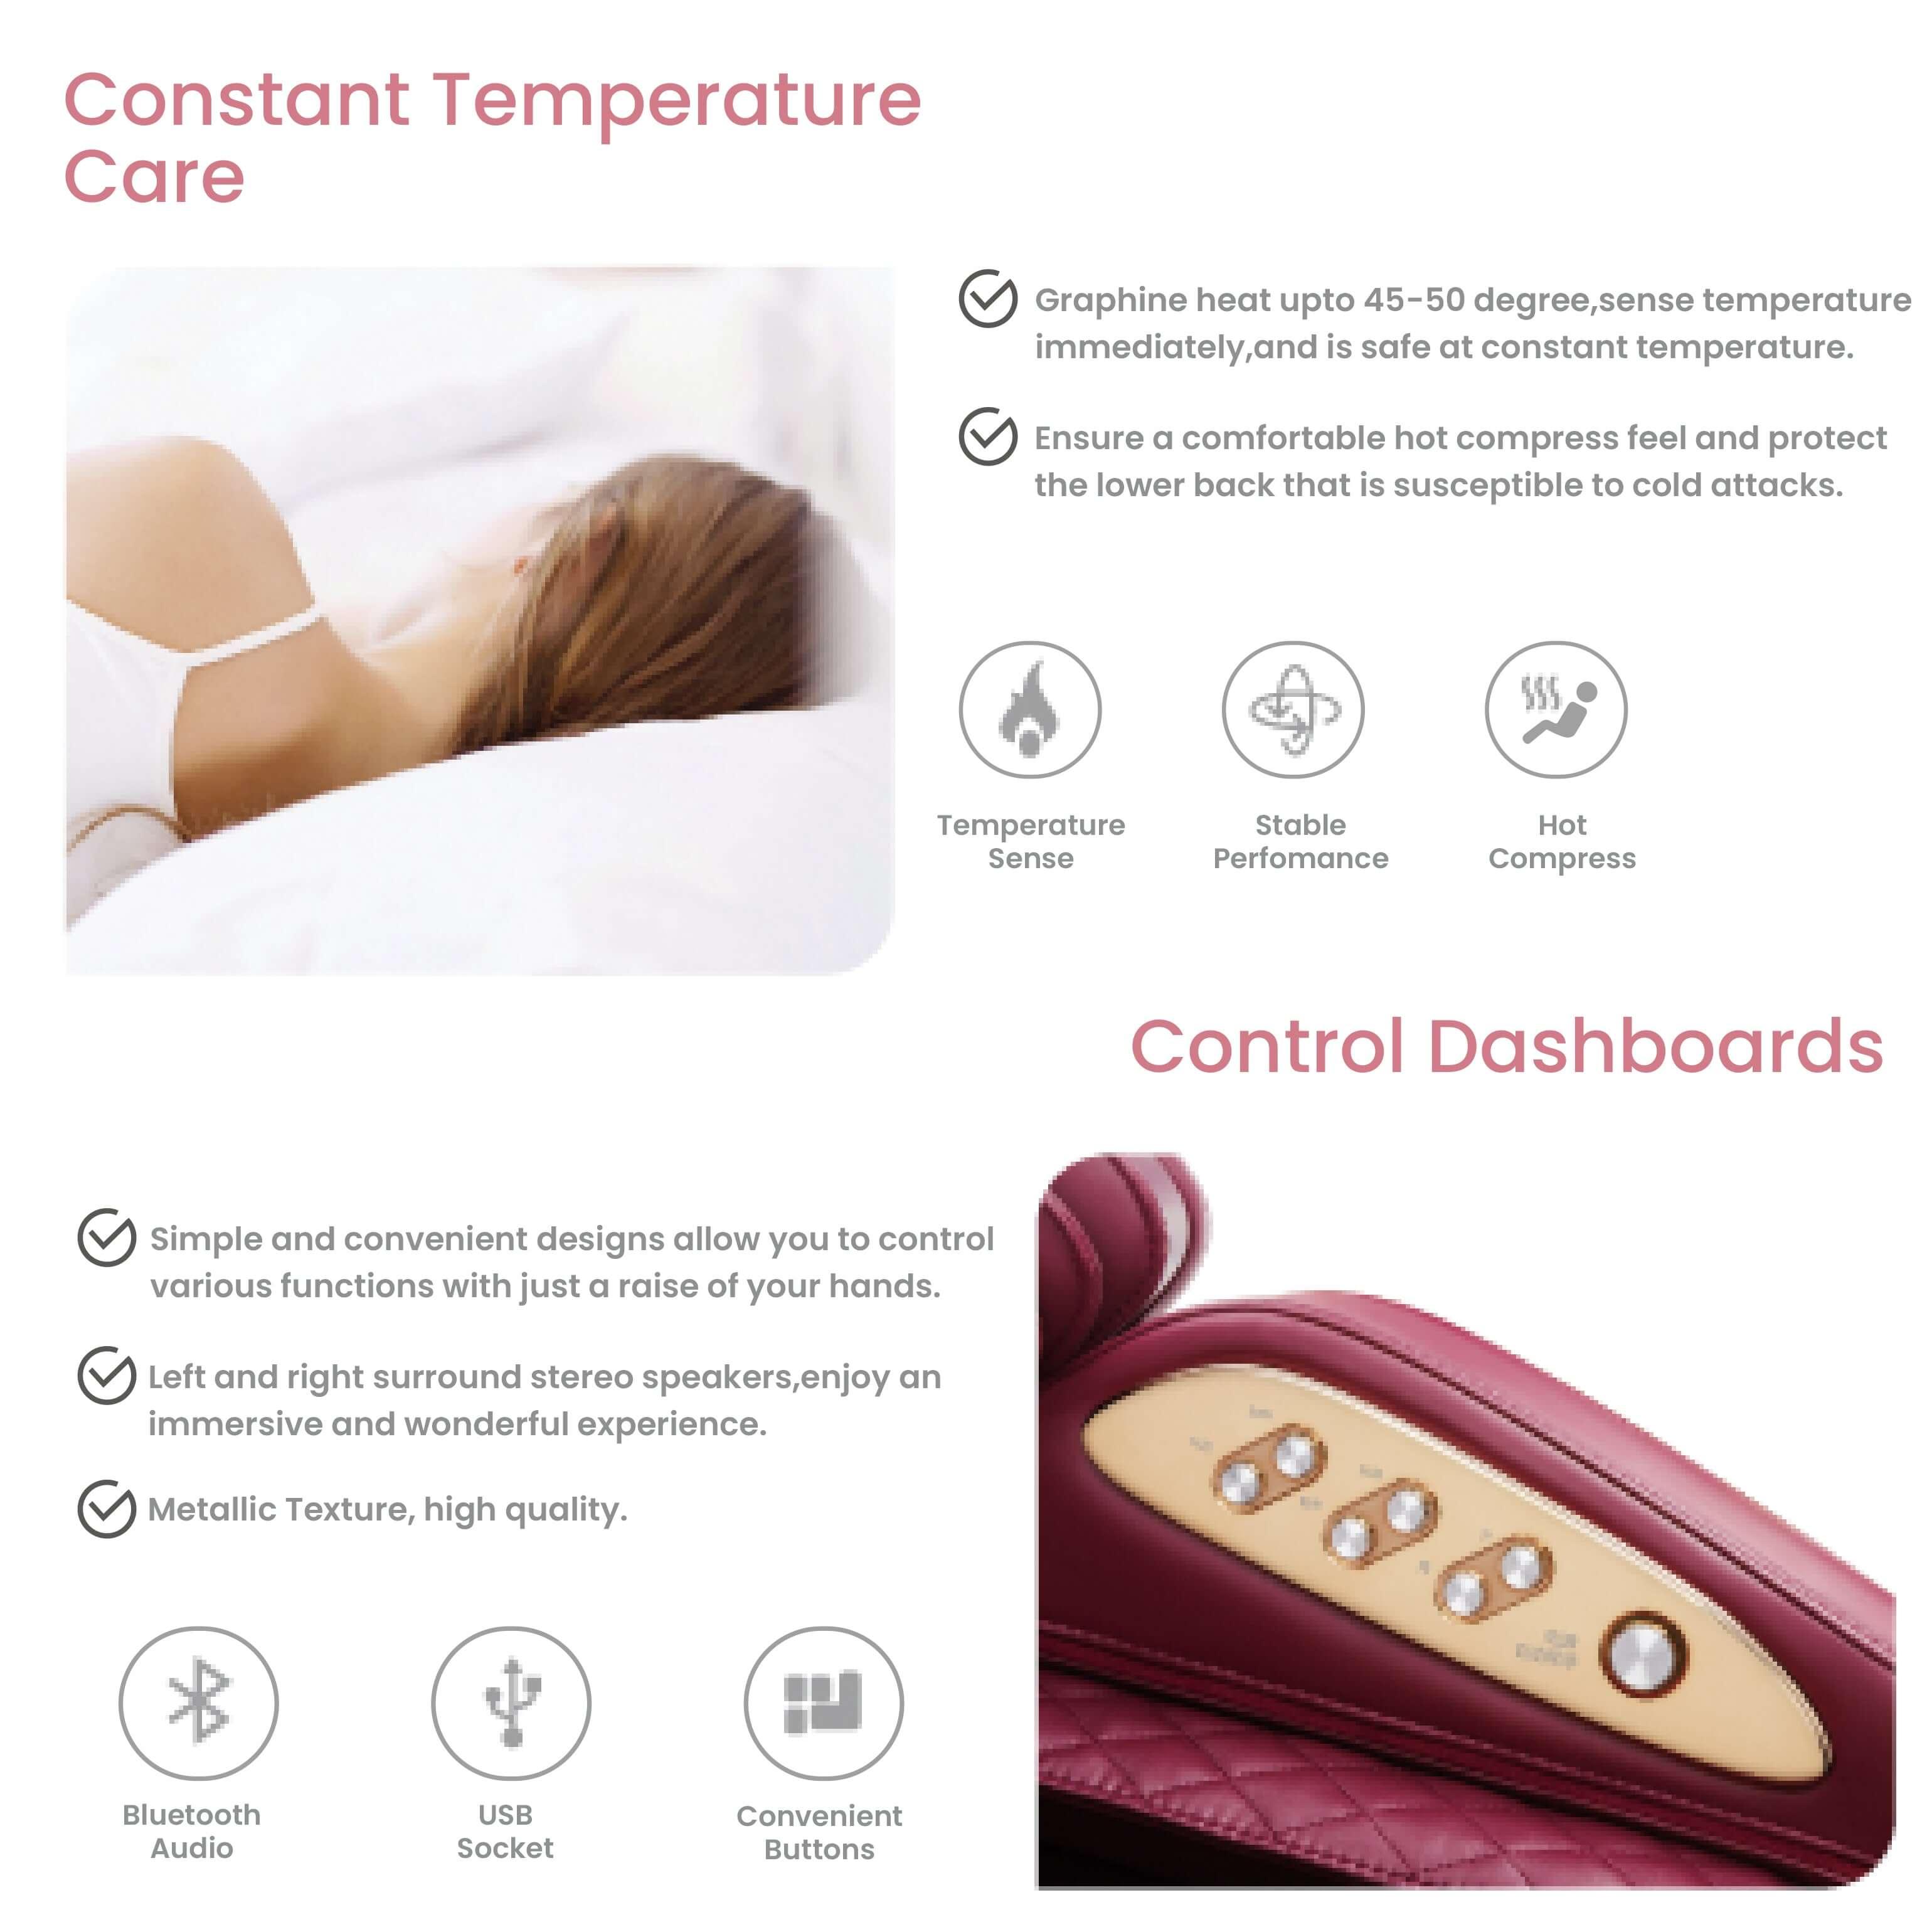 Control dashboards and constant temperature care features of the best massage chair in UAE with auto-extending footrest, Bluetooth, and more. best massage chair uae, massage chair Dubai, massage chair uae, massage chair Saudi Arabia, كرسي التدليك, Best ma